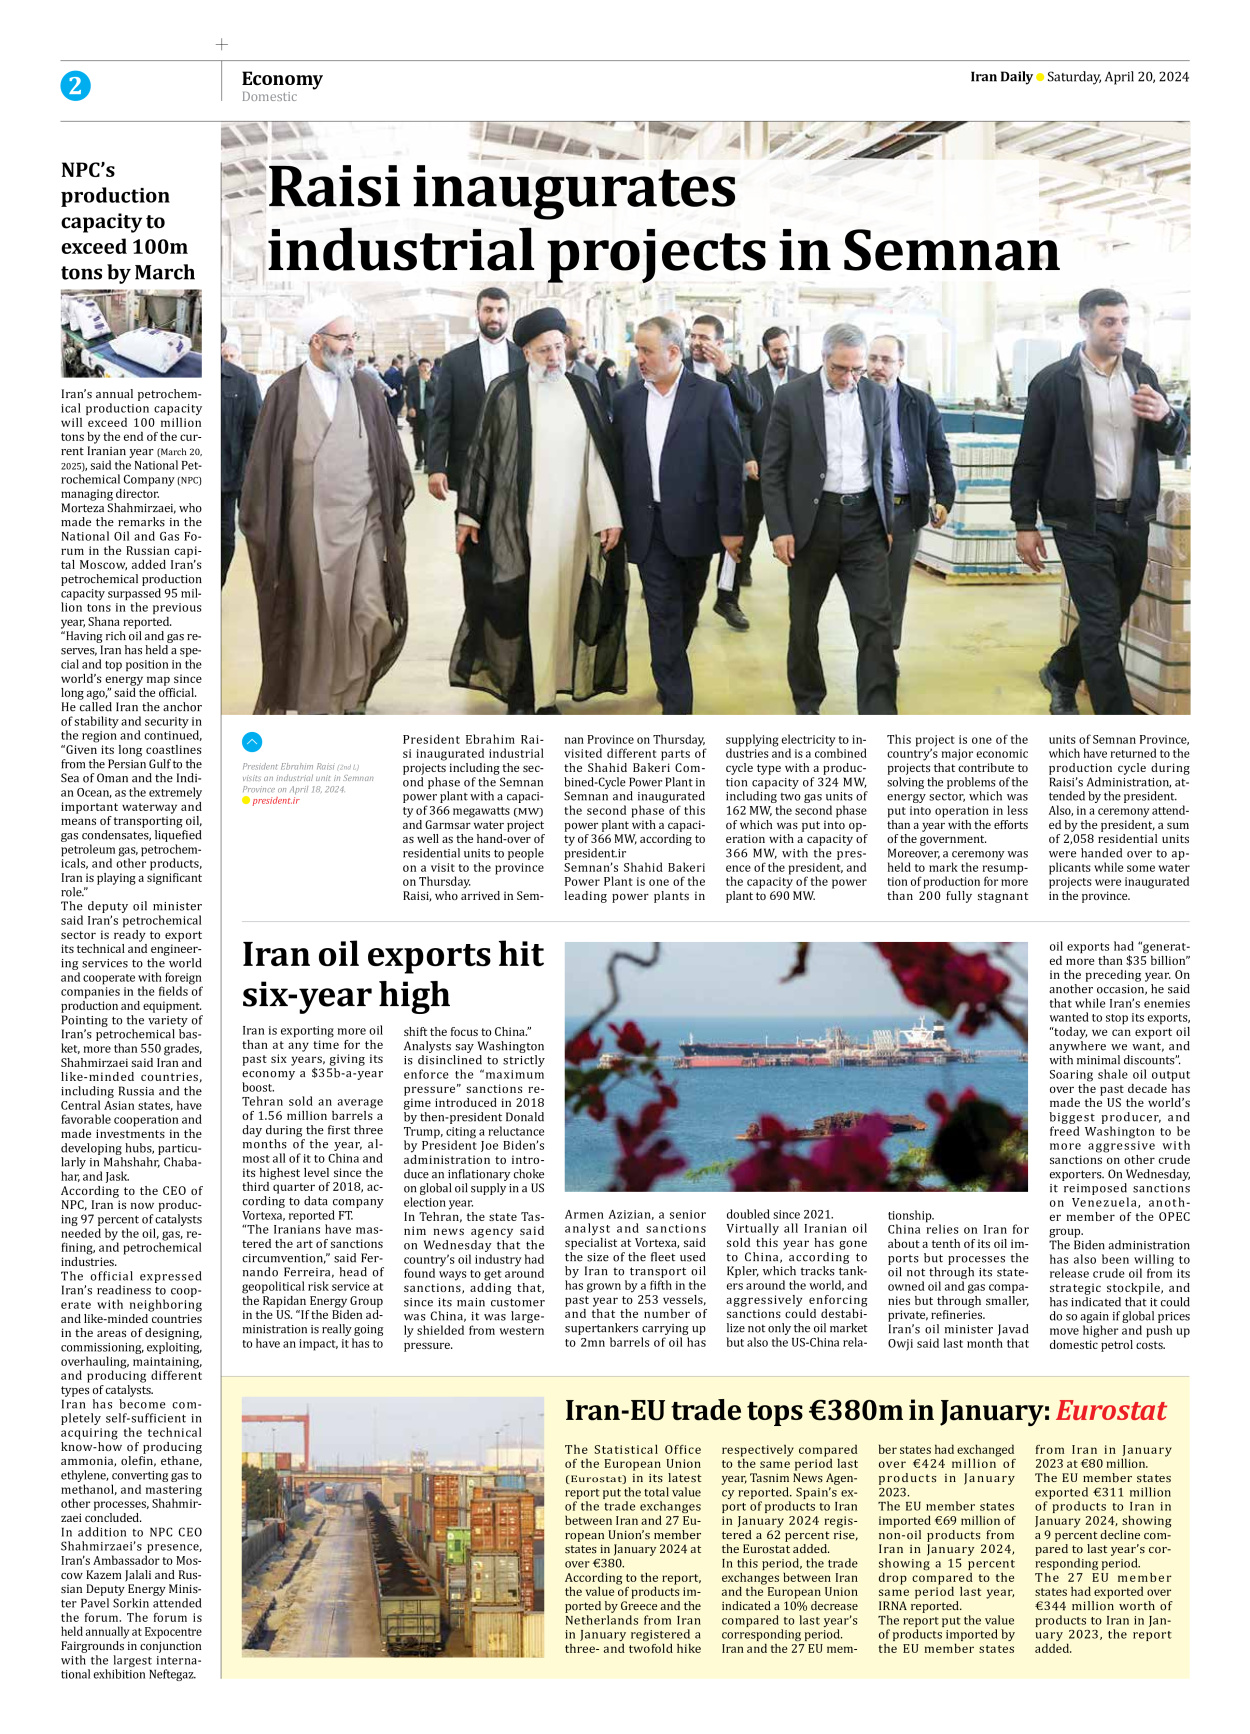 Iran Daily - Number Seven Thousand Five Hundred and Thirty Seven - 20 April 2024 - Page 2